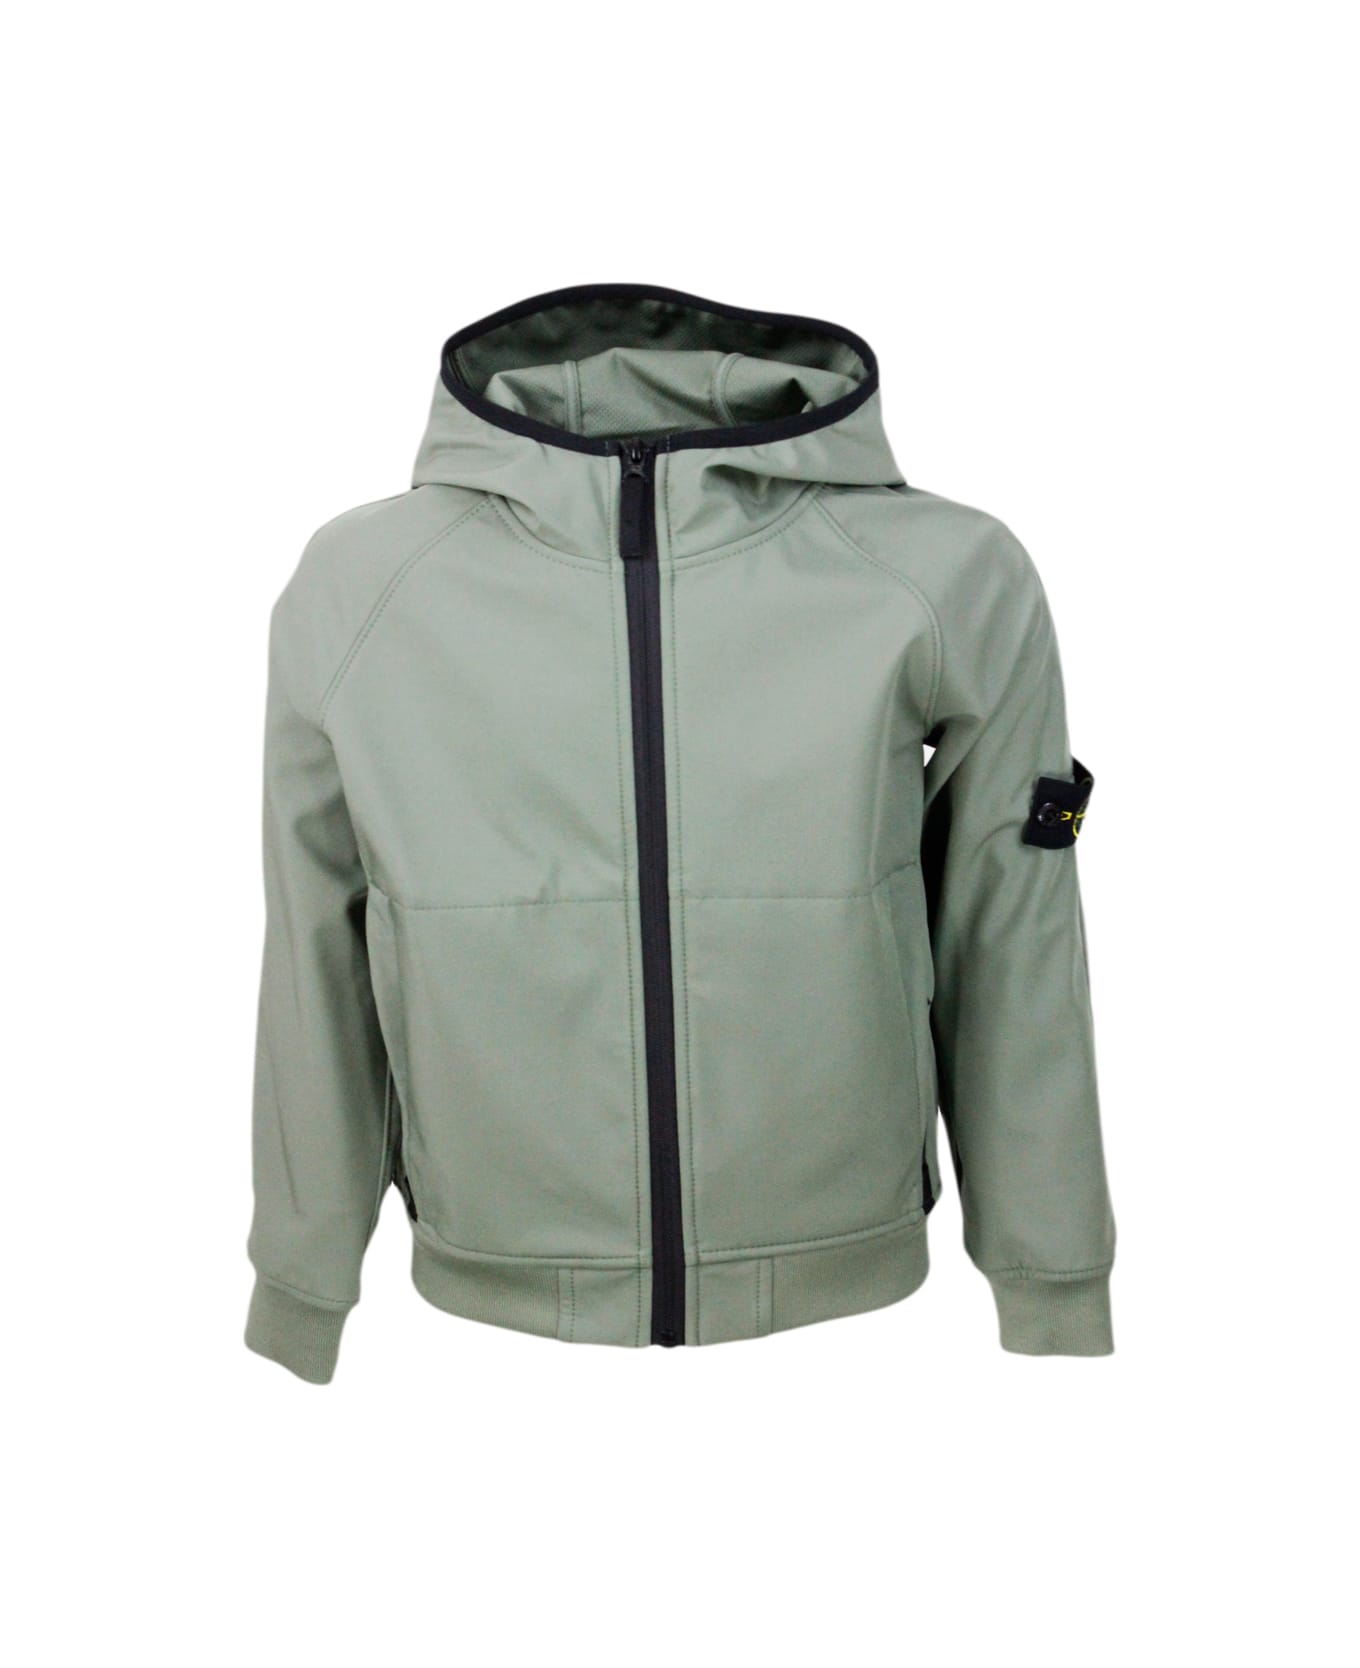 Stone Island Jacket In Water Resistant Technical Fabric With Hood And Zip Closure. Logo Applied On The Sleeve - Military